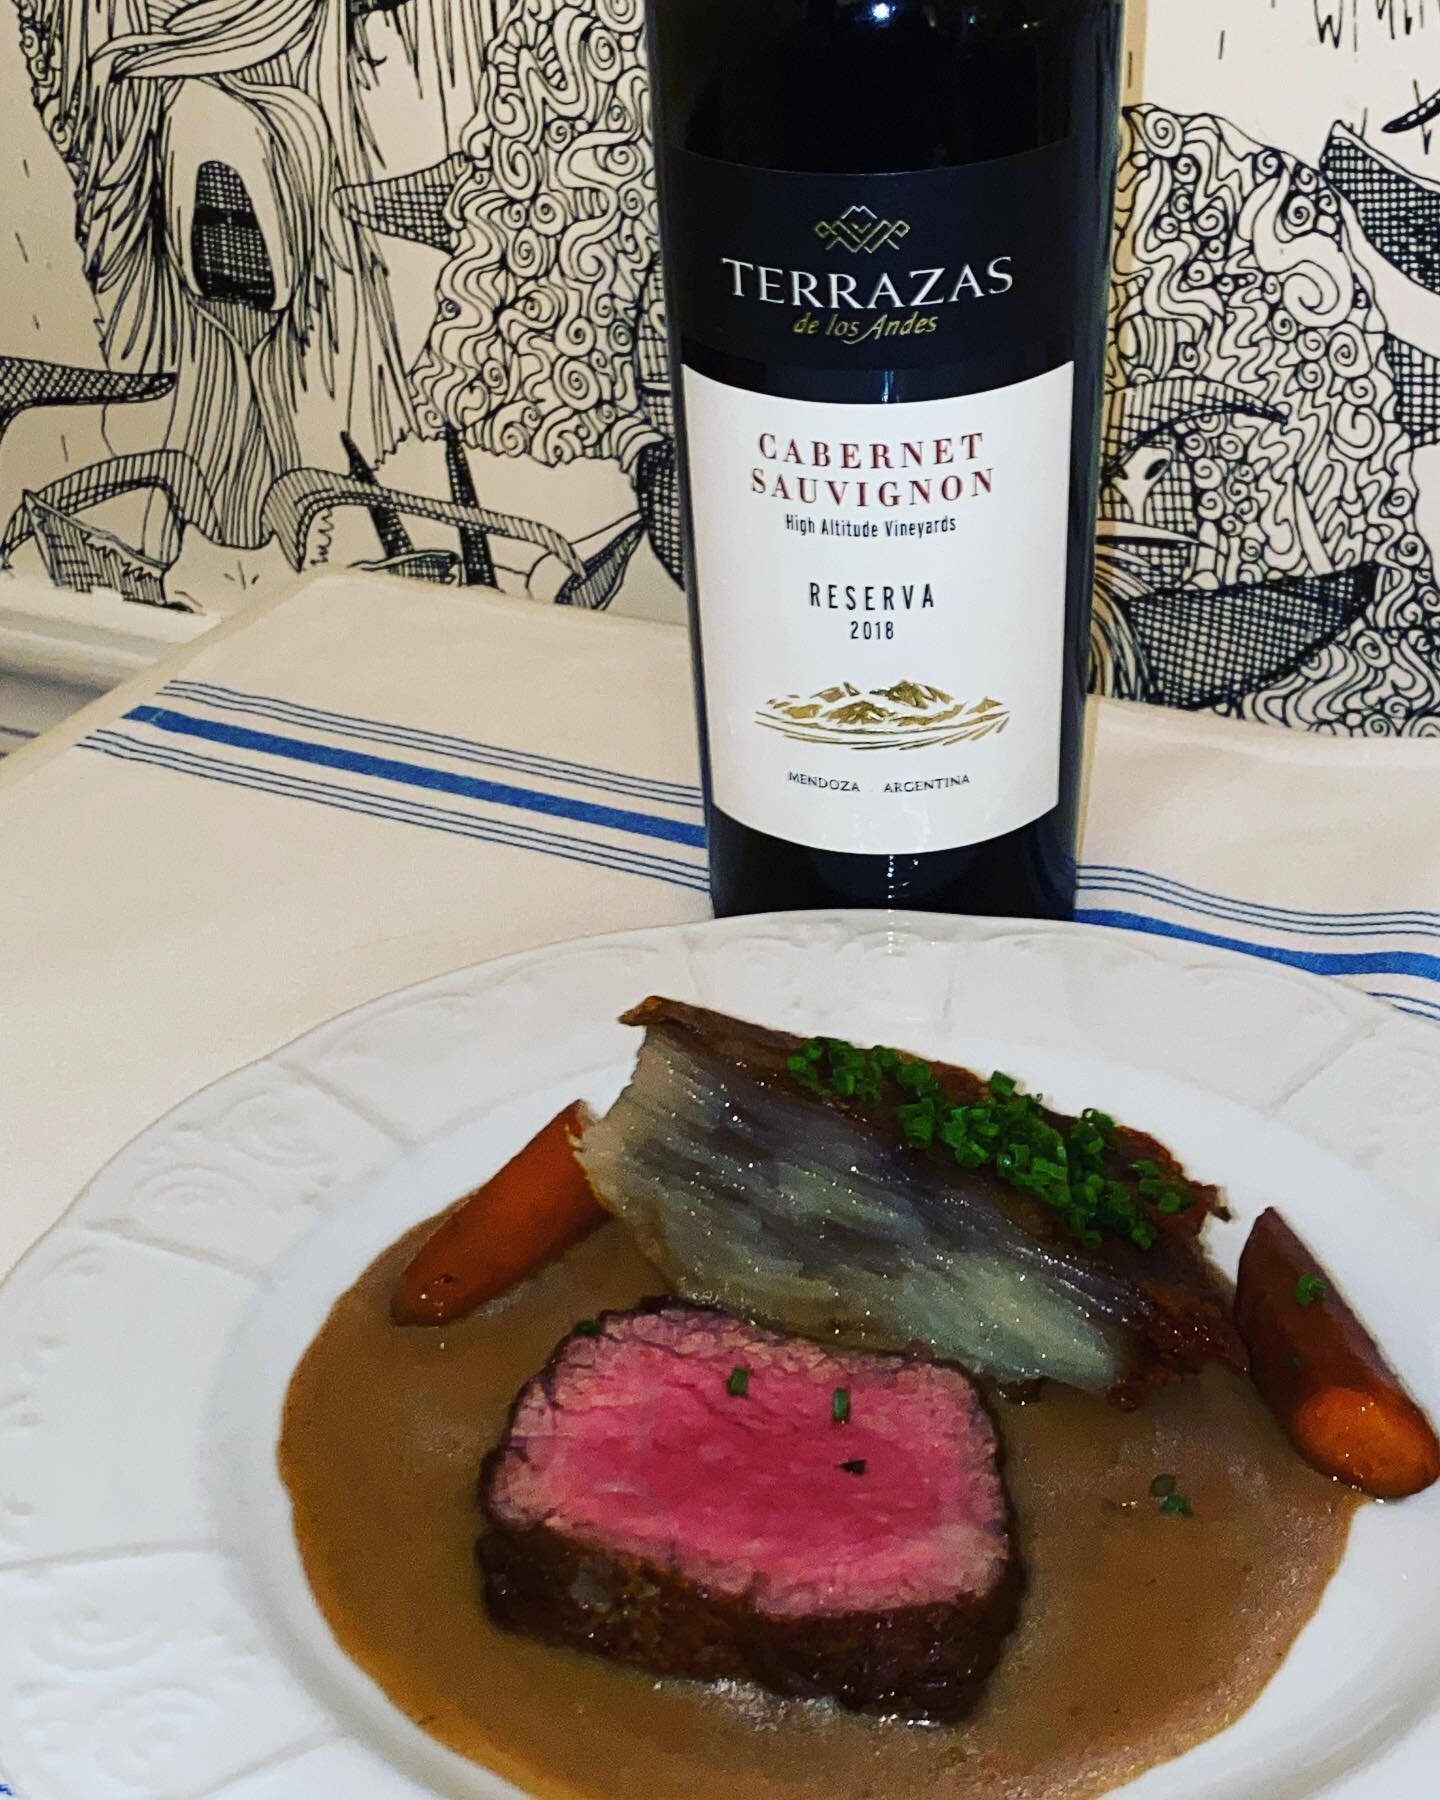 Our Main Course is Seared Rib Eye Loin with pommes Anna, red wine carrots and french onion jus paired with Terrazes, Reserva Cabernet Sauvignon, Uco Valley, Argentina 2018 #thefrenchgoat #lewisburgwv #bonappalachia #simplygbv 
#bistrolife @moethennes